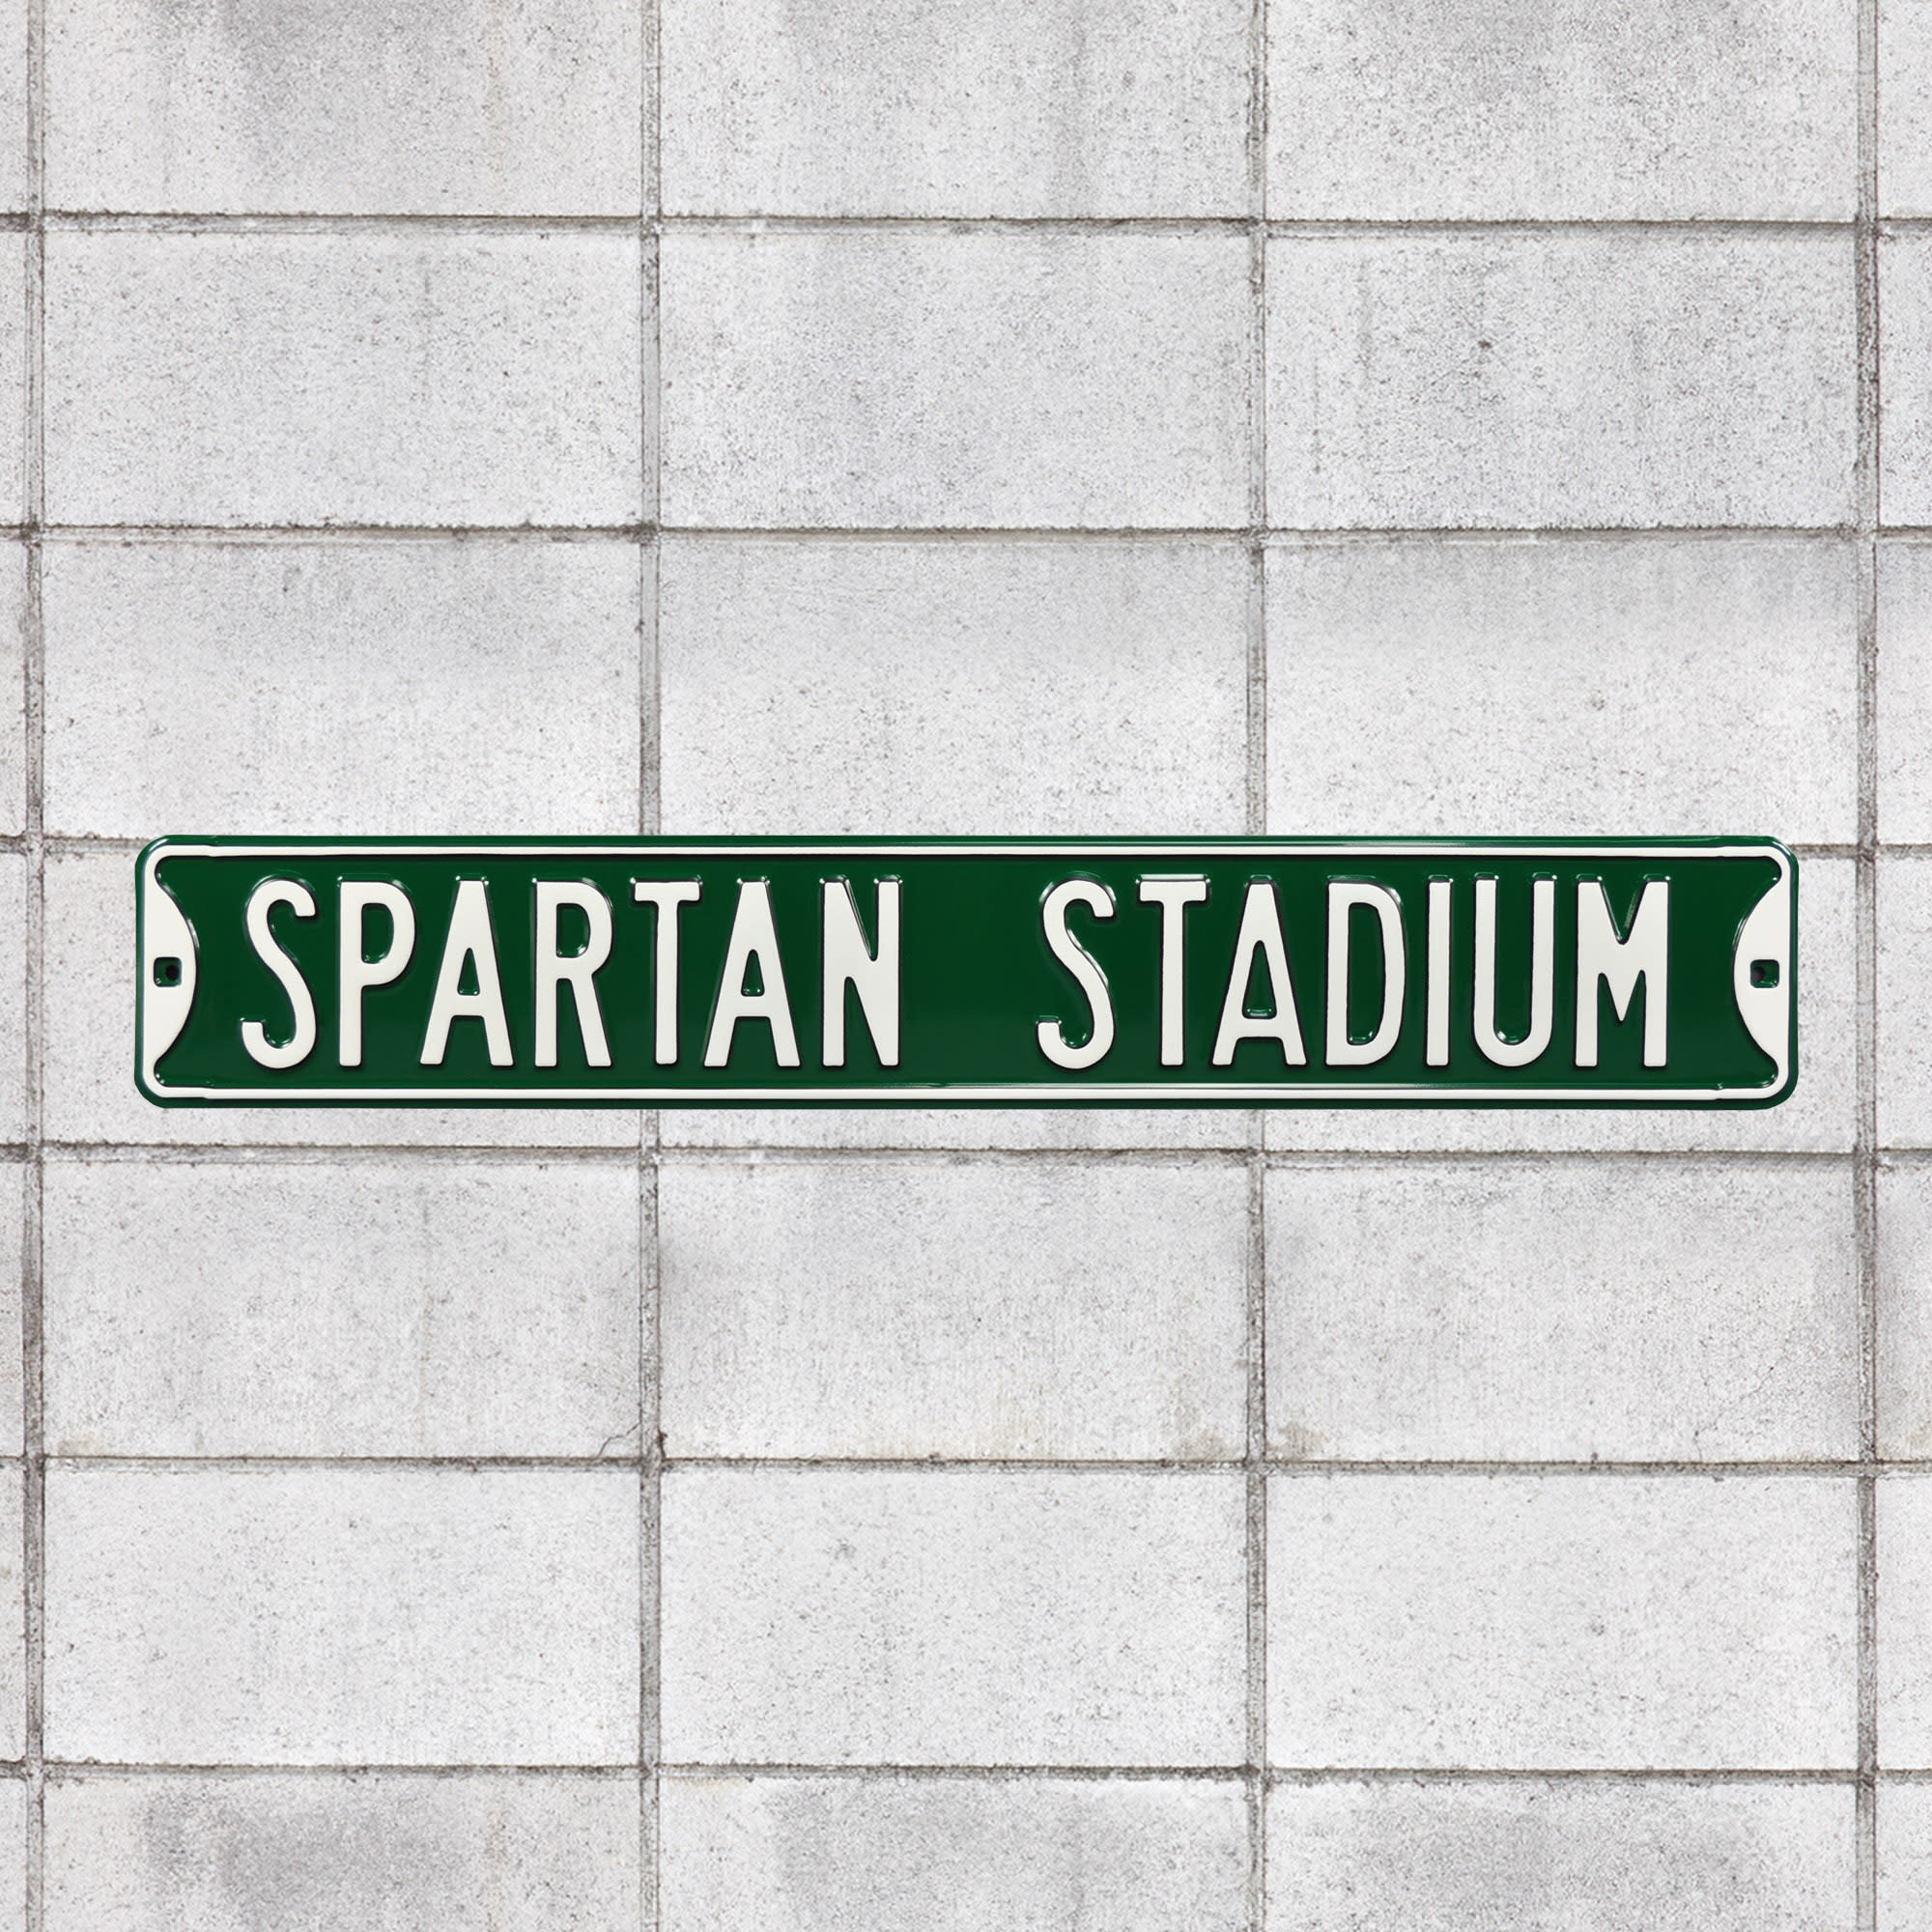 Michigan State Spartans: Spartan Stadium - Officially Licensed Metal Street Sign 36.0"W x 6.0"H by Fathead | 100% Steel